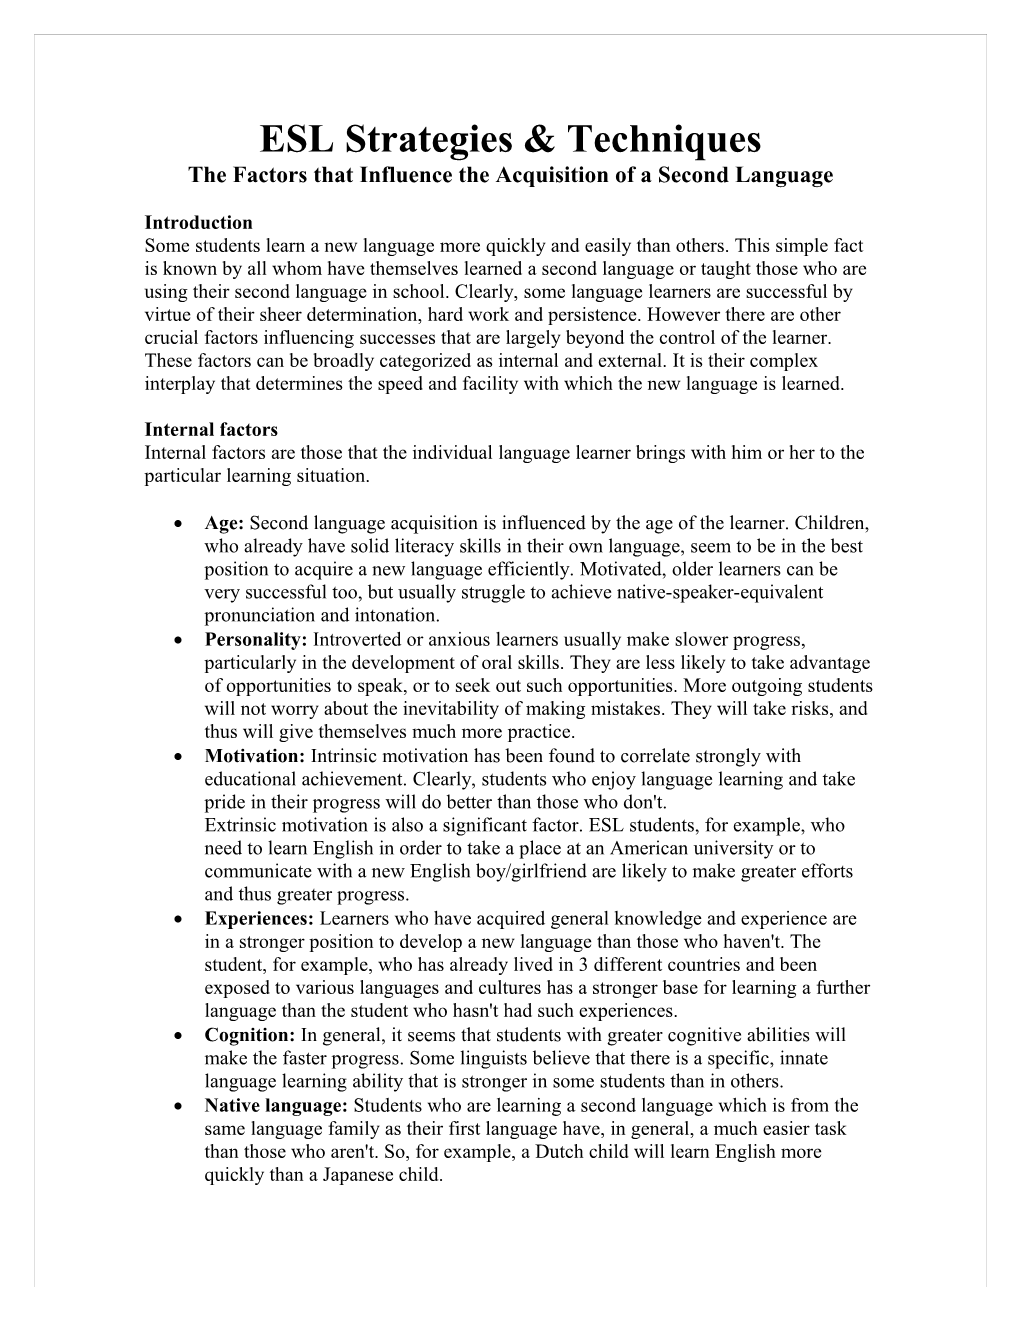 The Factors That Influence the Acquisition of a Second Language